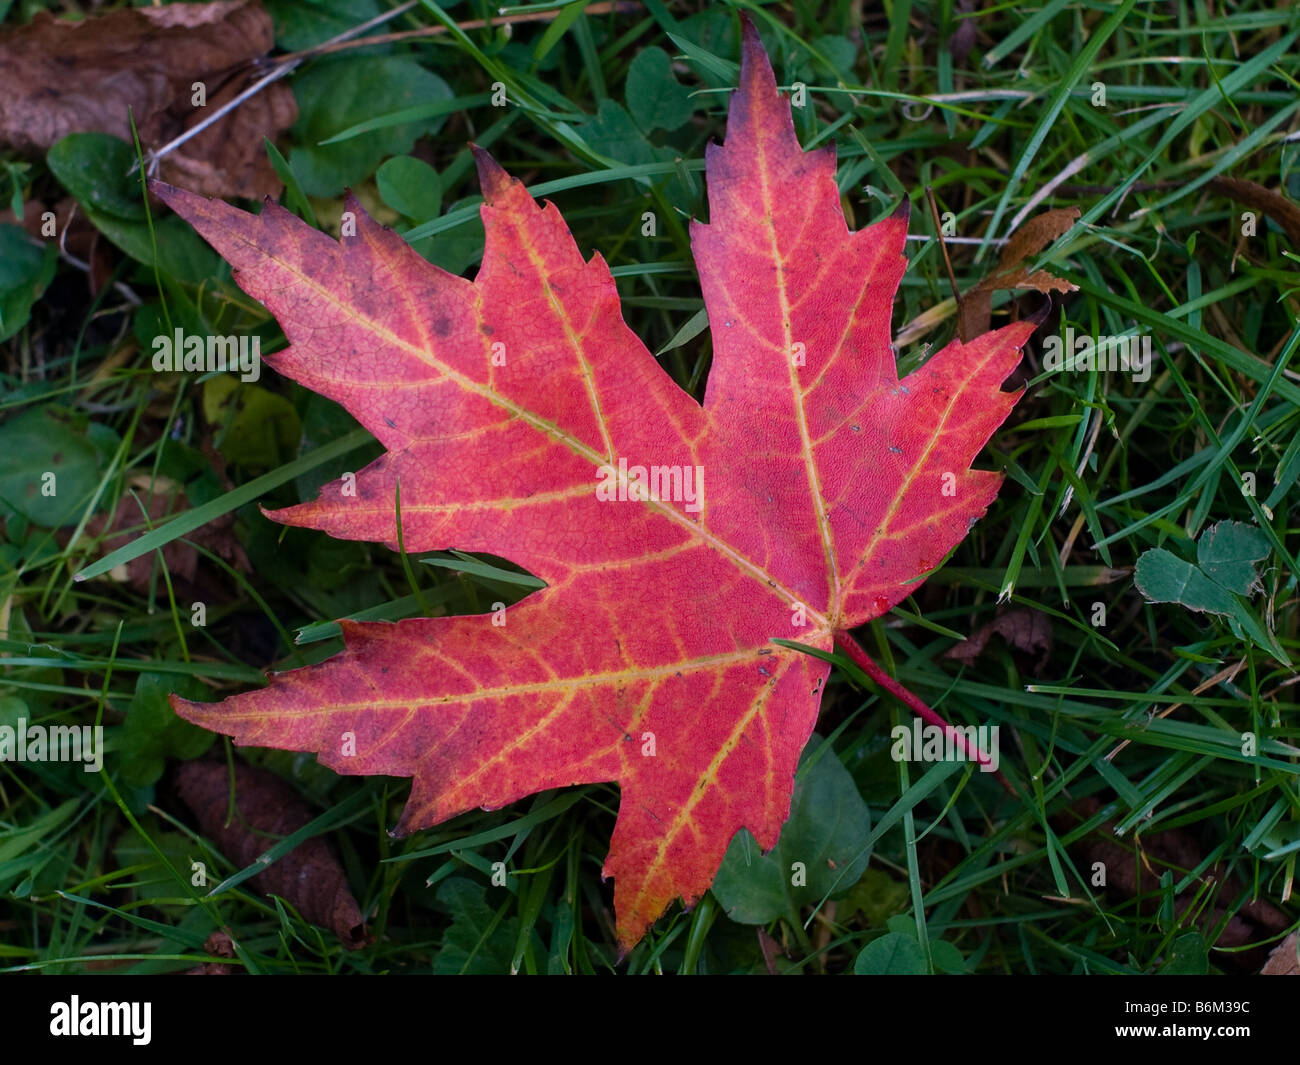 A single maple leaf on a green lawn. Stock Photo